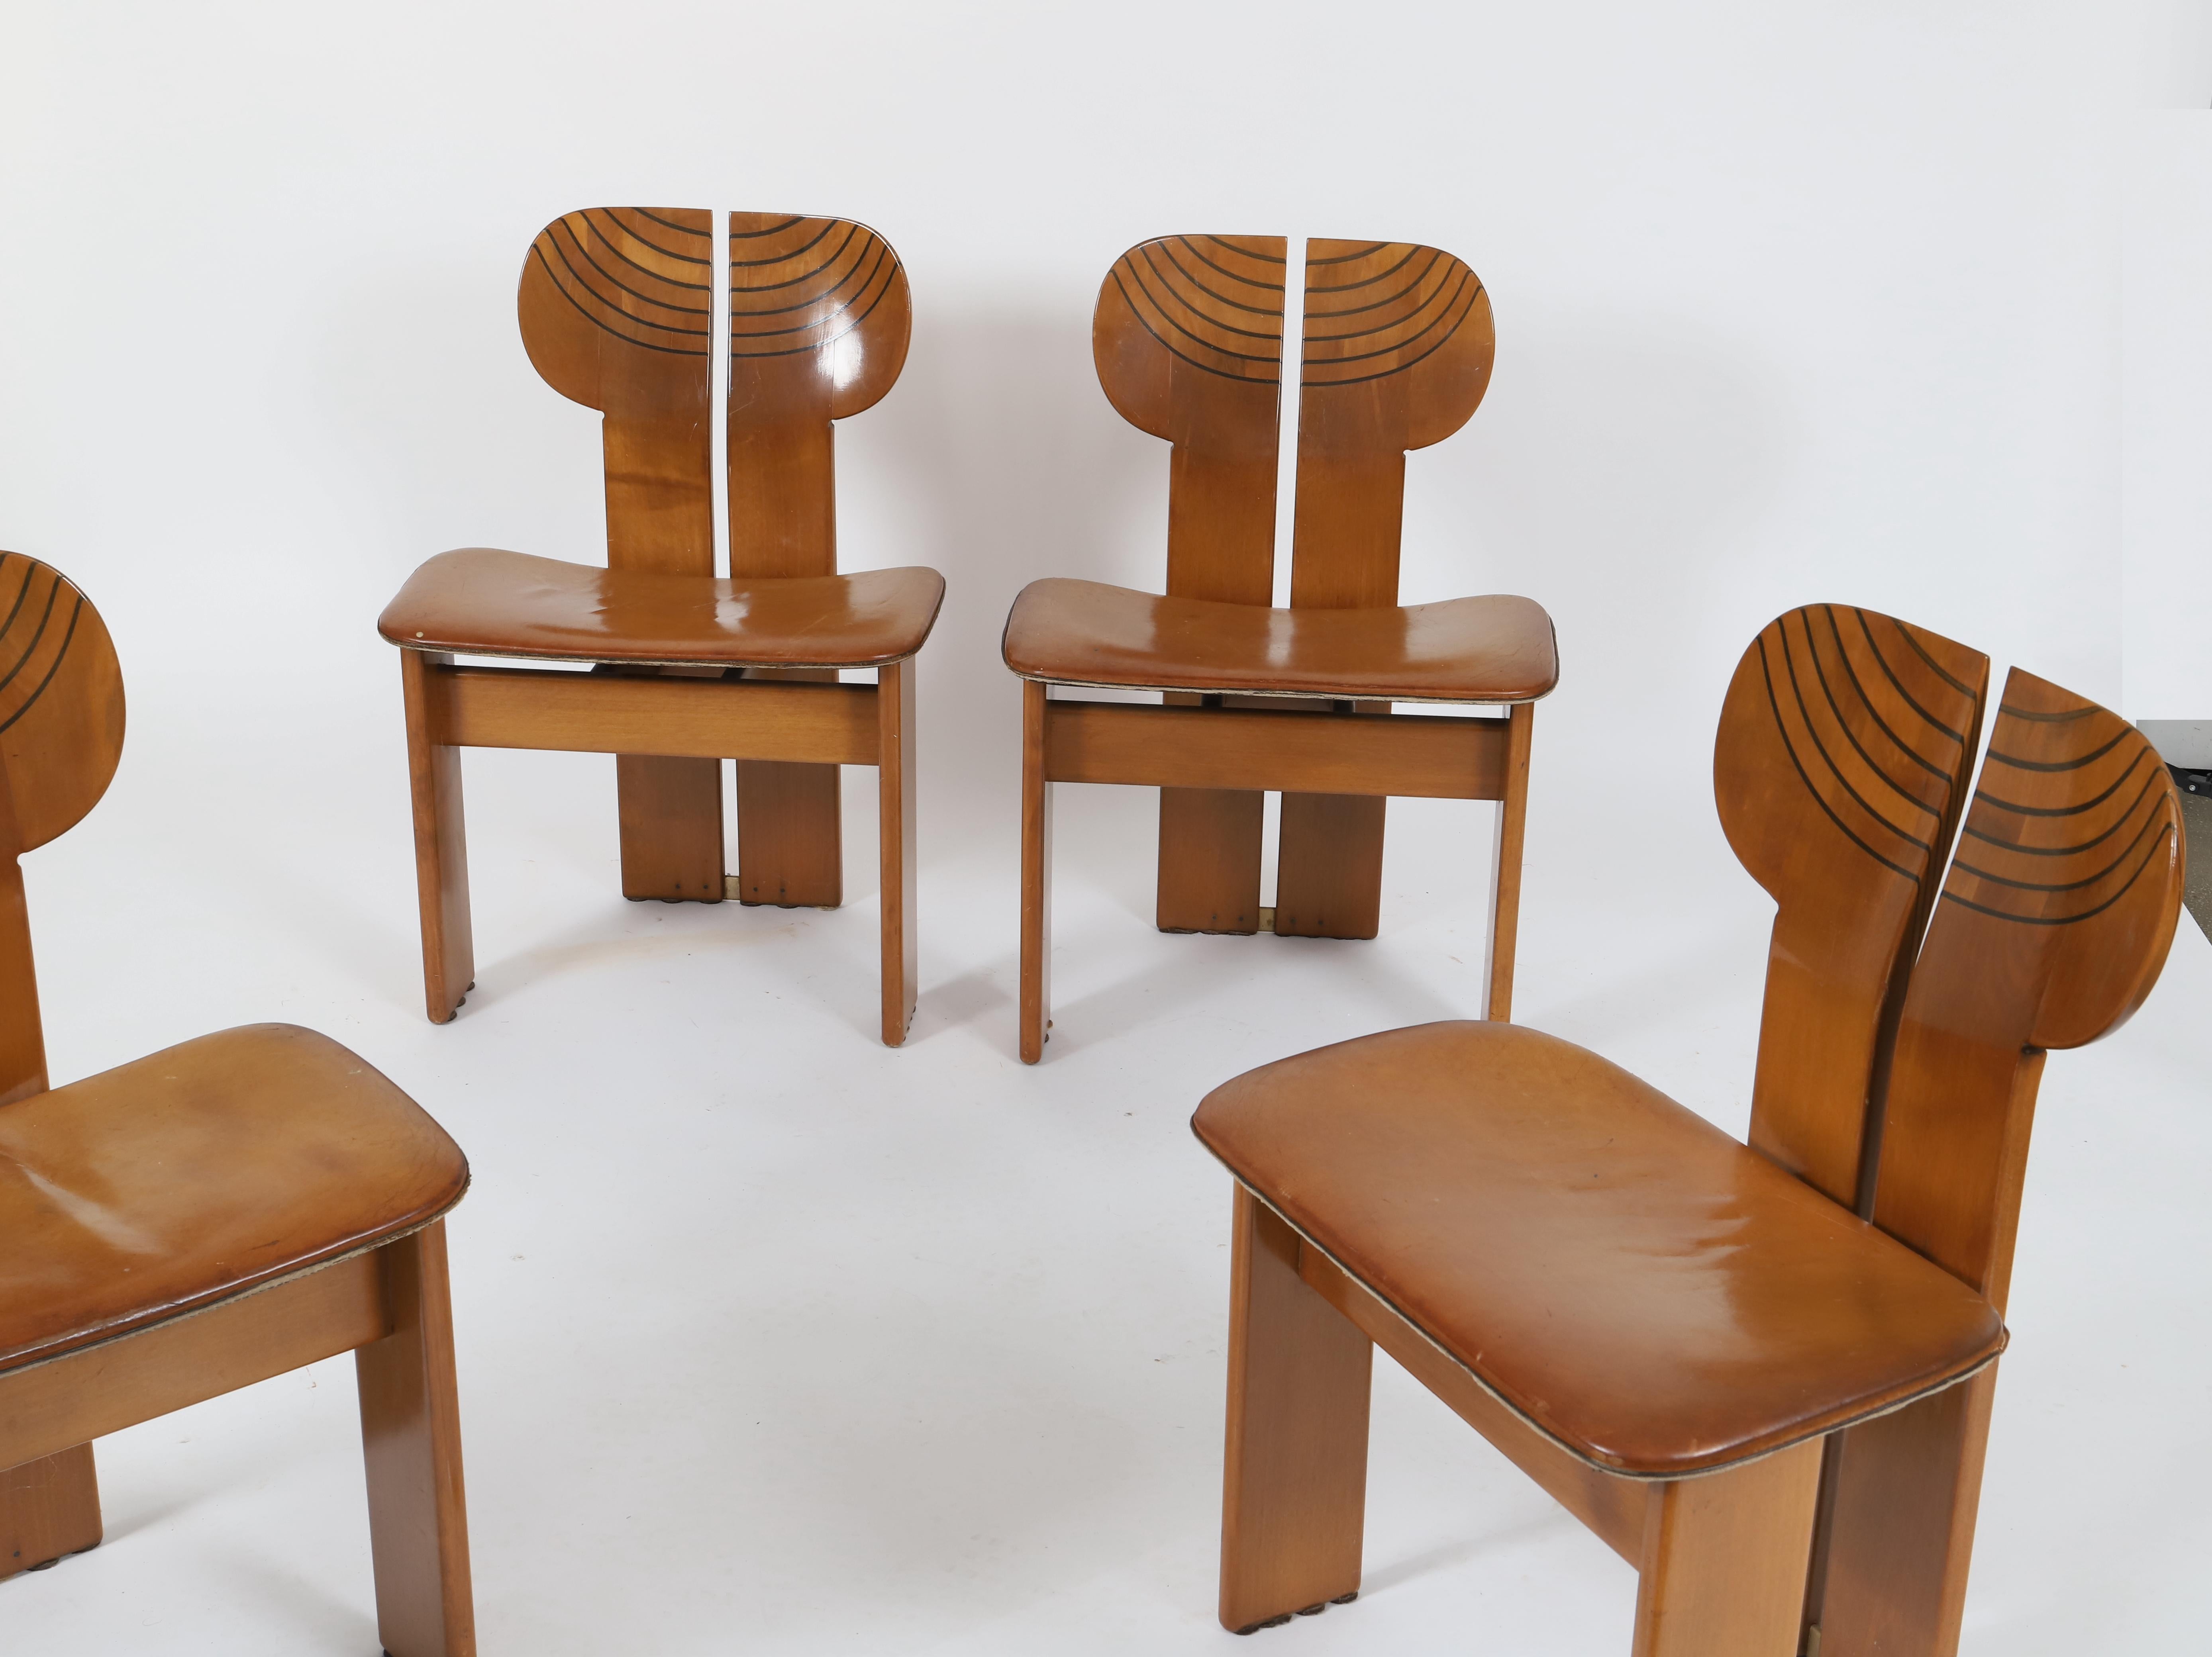 Afra (1937-2011) & Tobia Scarpa (born in 1935)
Africa
Artona series
Dining table and four chairs
Walnut, ebony, leather and brass
Edited by Maxalto
Model created in 1975